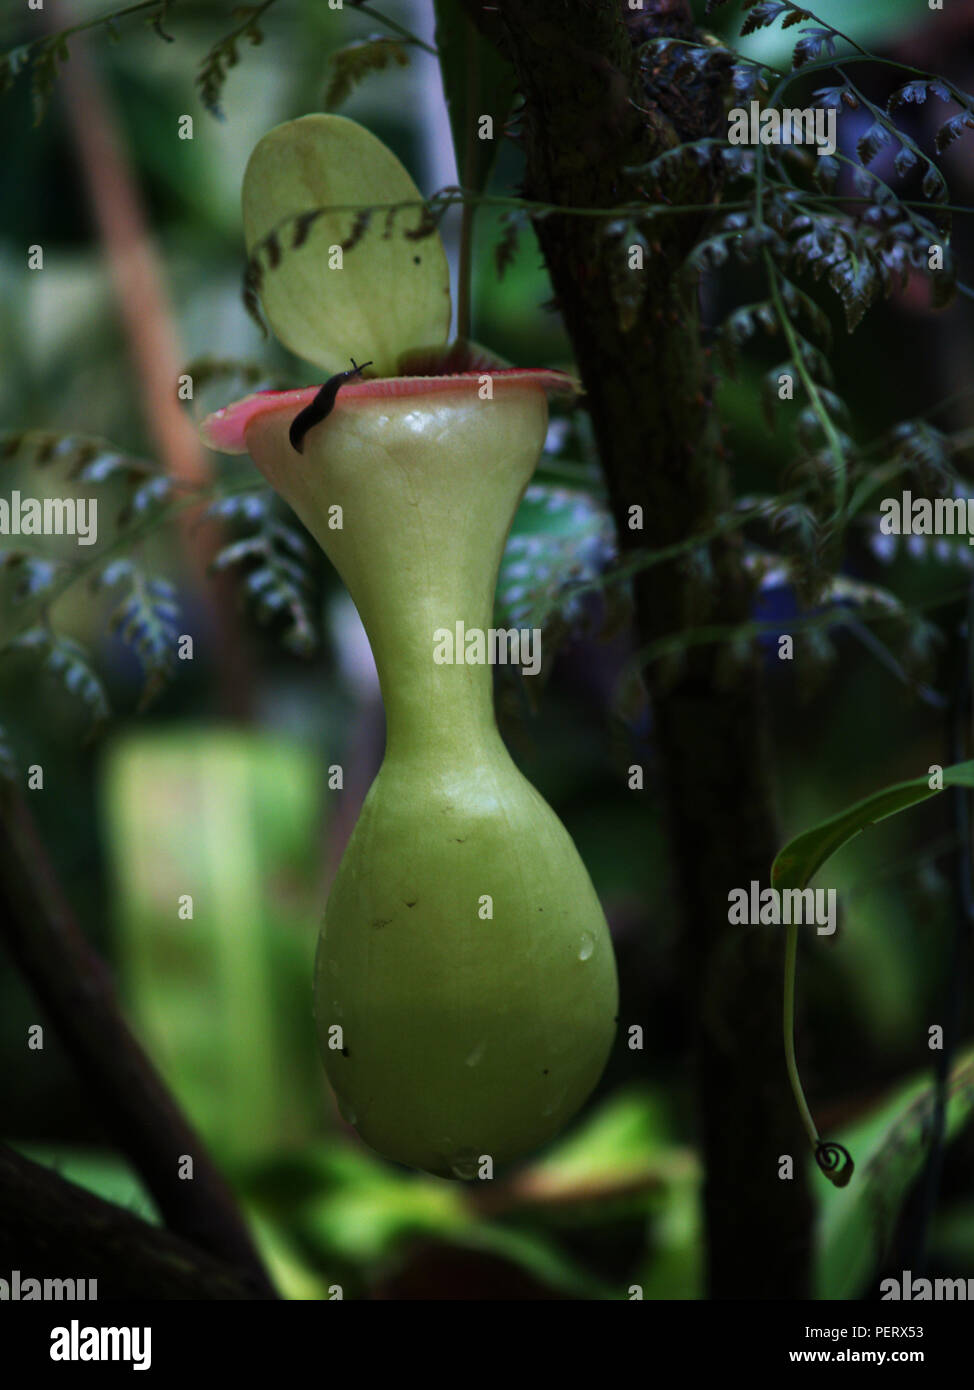 Cup of pitcher plant prepare to catch quarry Stock Photo